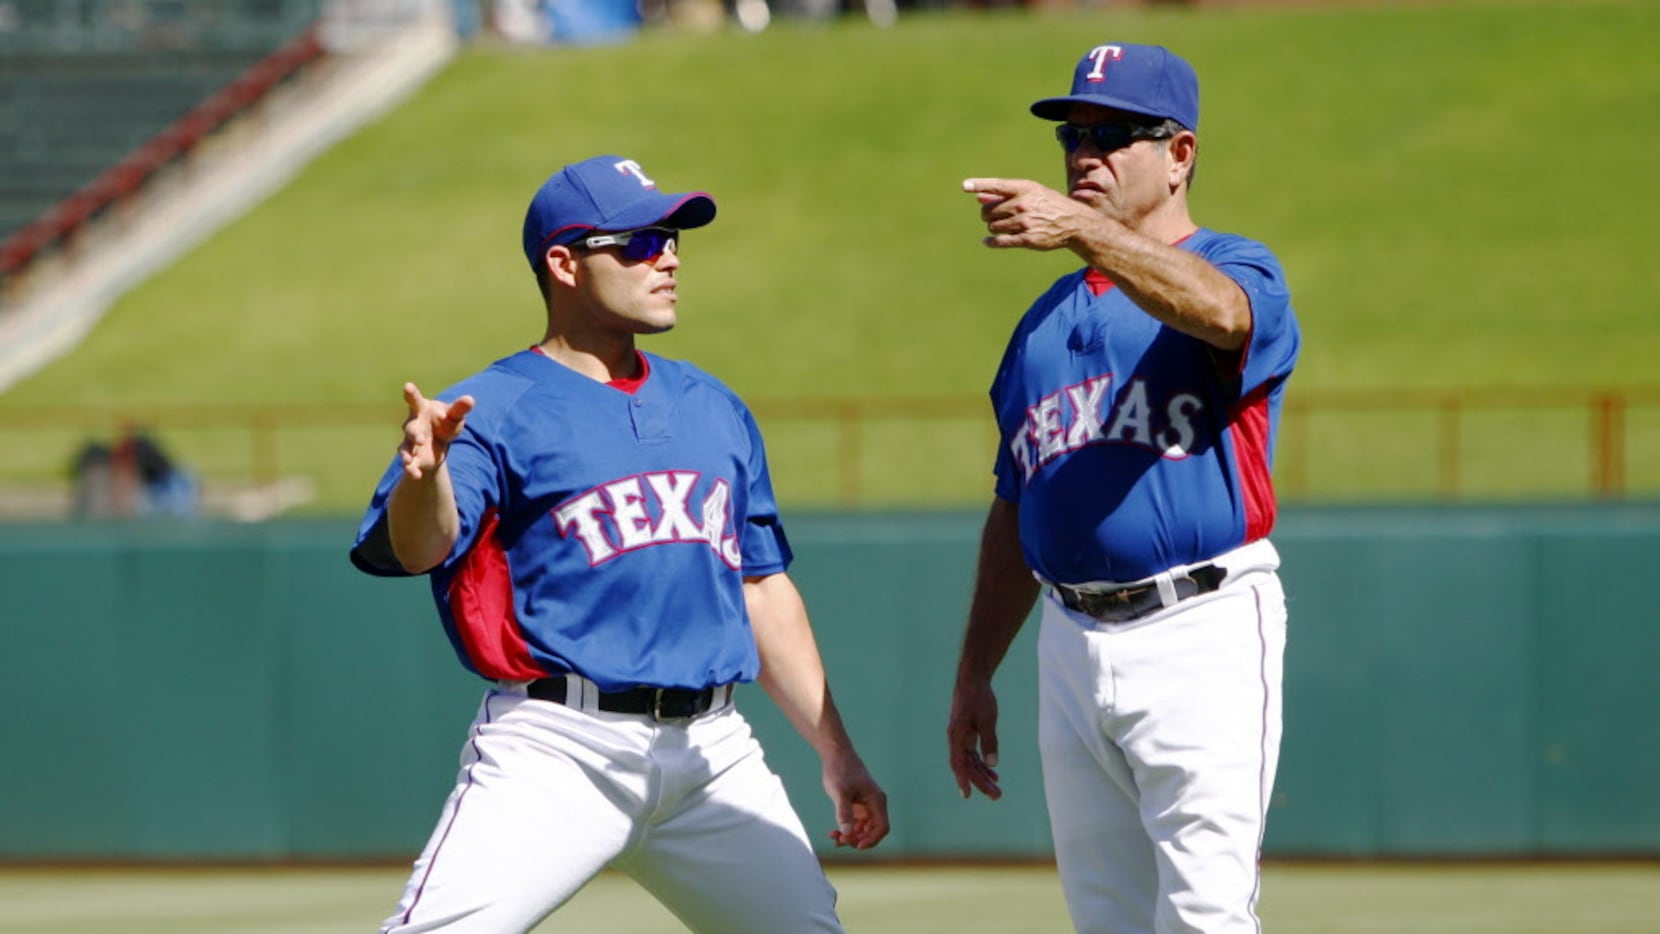 Just One Throw, And I Became A Texas Ranger': Pudge Rodriguez